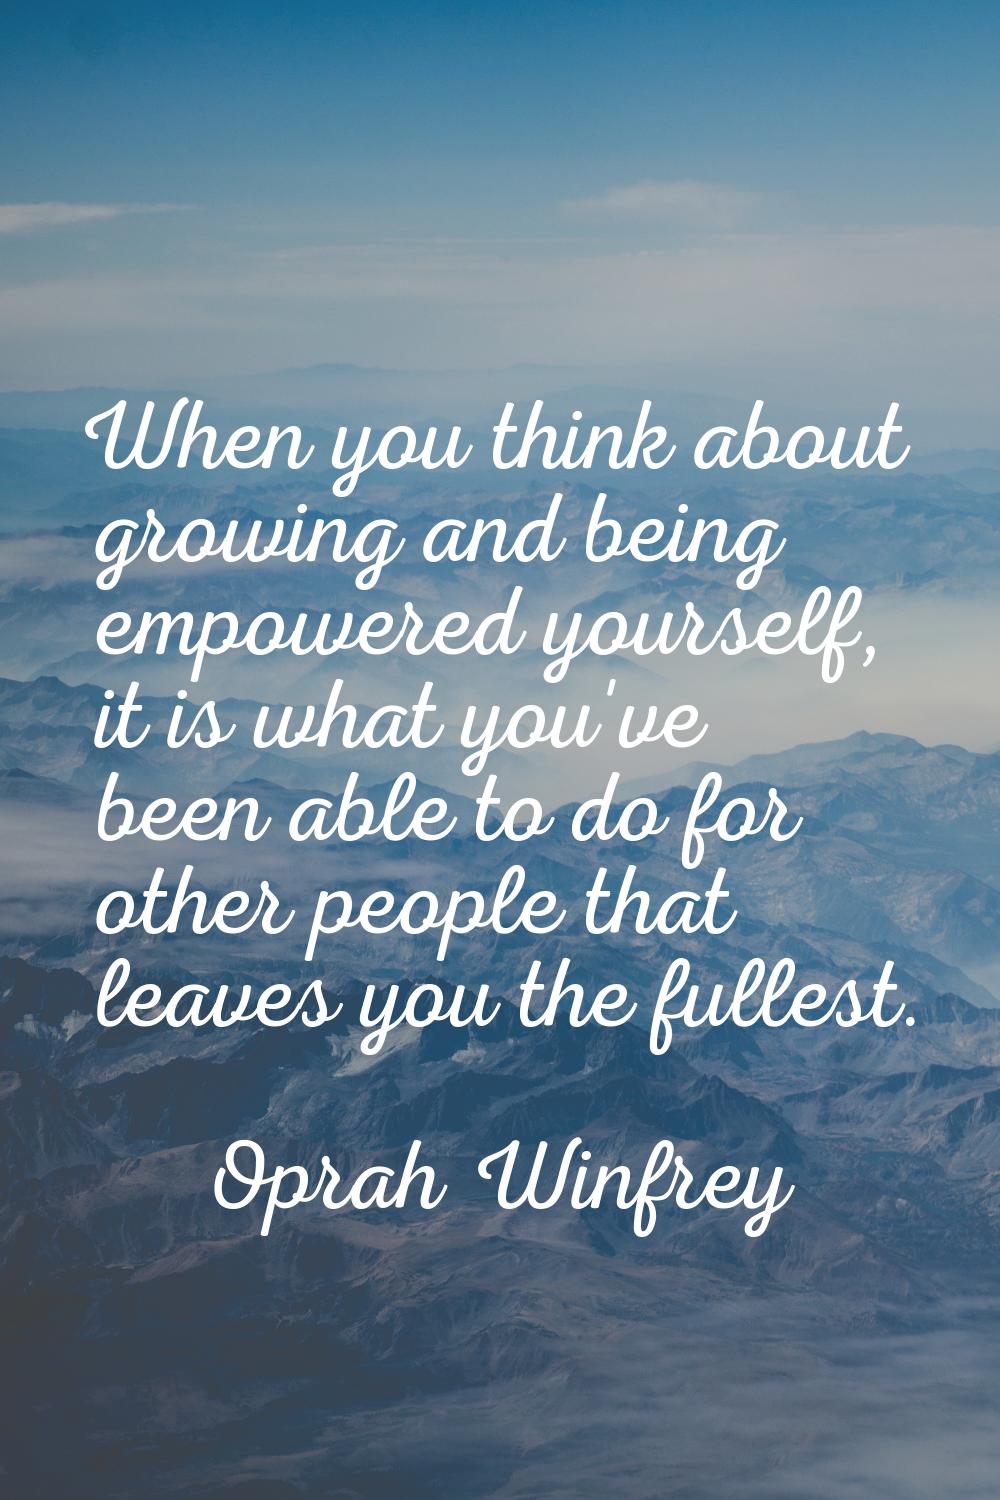 When you think about growing and being empowered yourself, it is what you've been able to do for ot